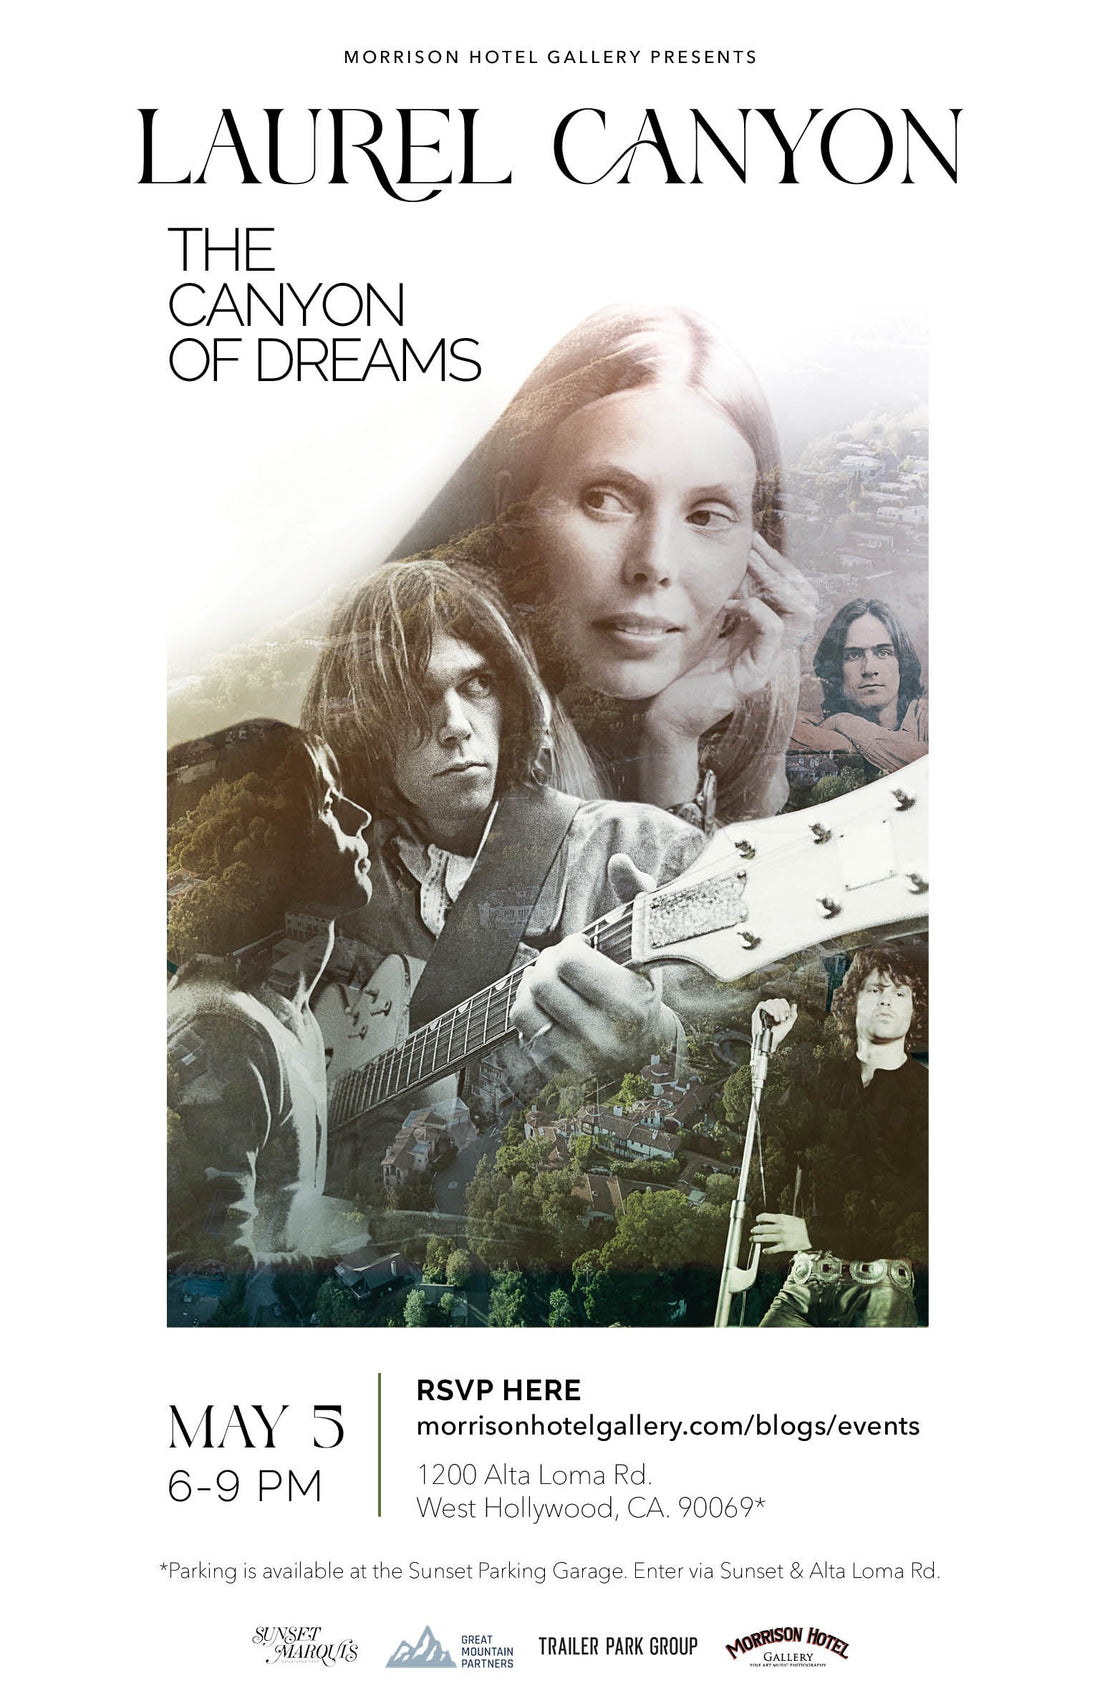 Laurel Canyon: The Canyon of Dreams - Morrison Hotel Gallery